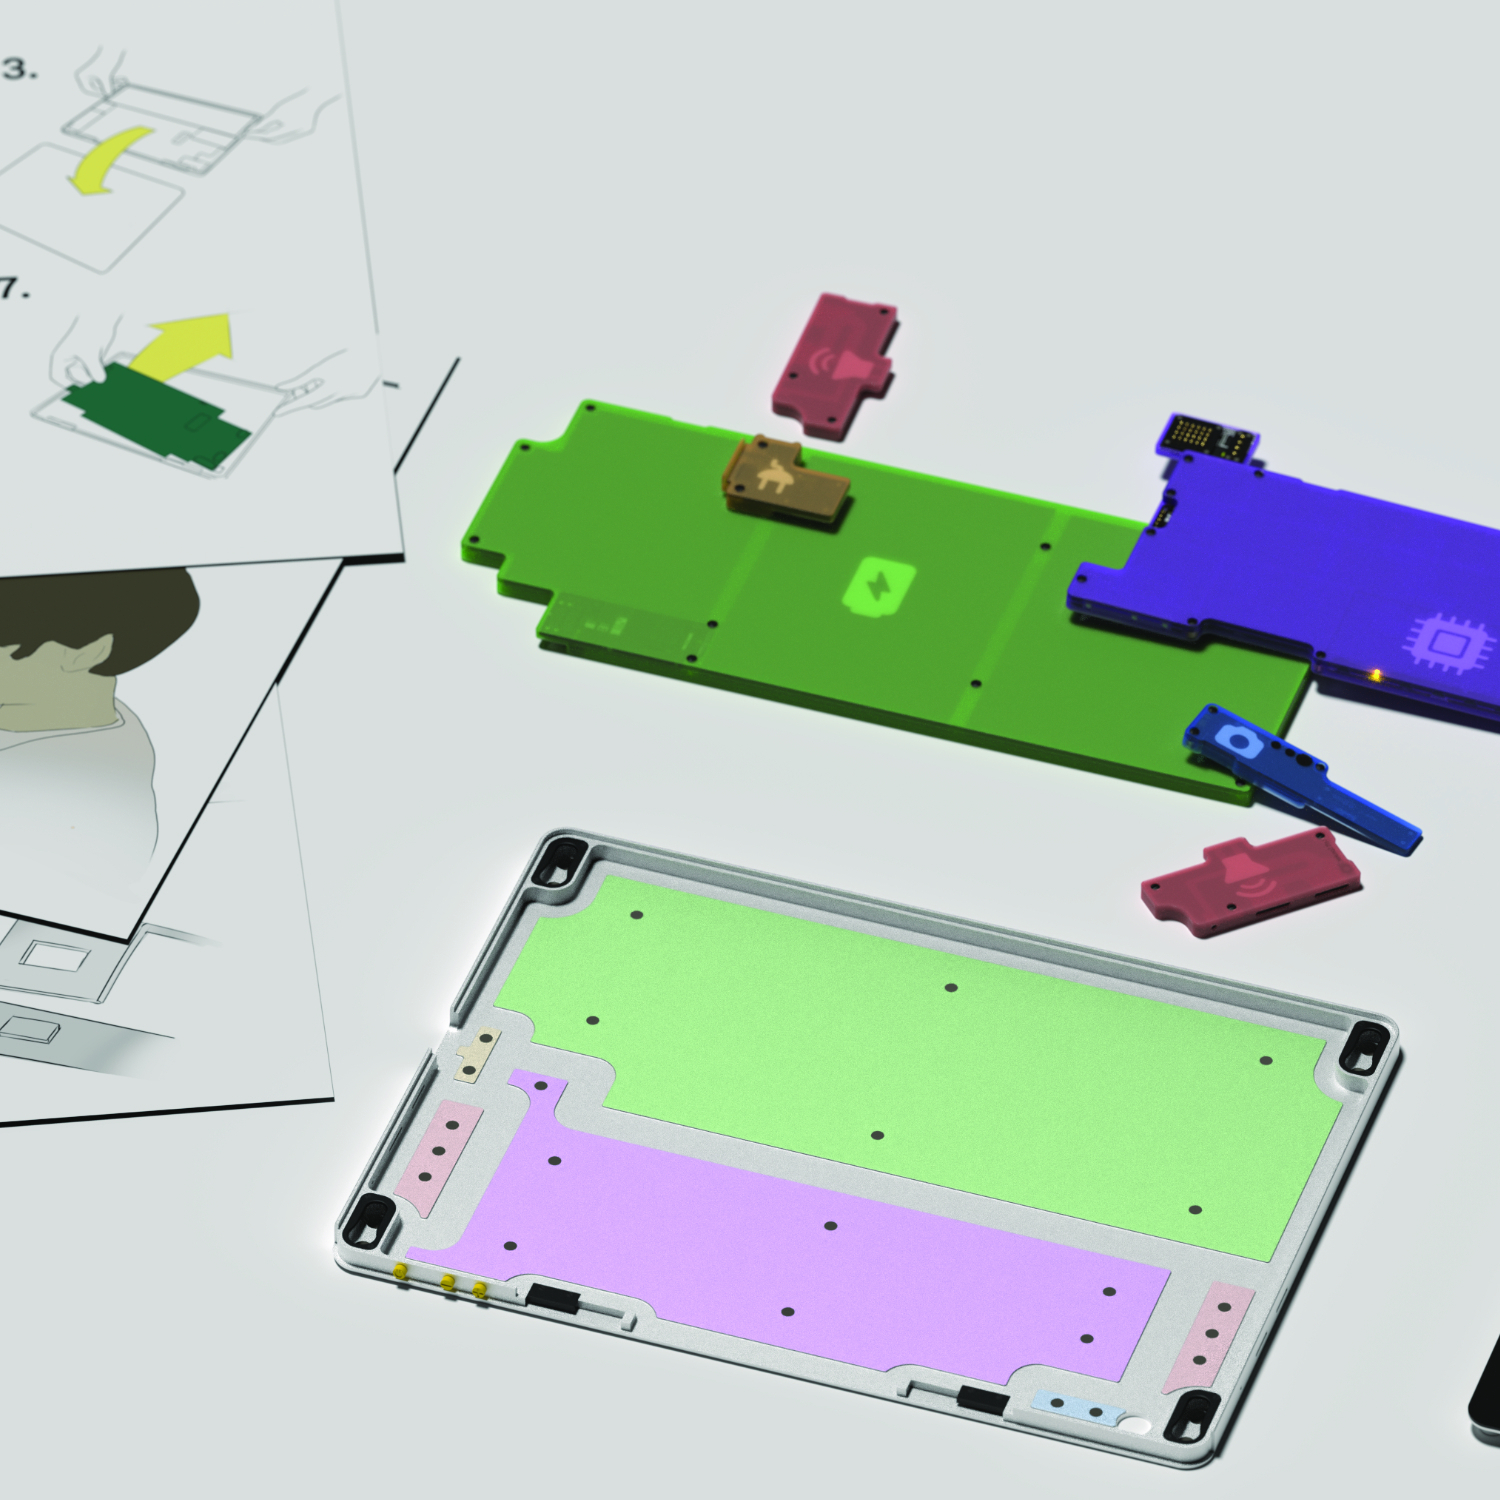 Image of the parts of a disassembled tablet